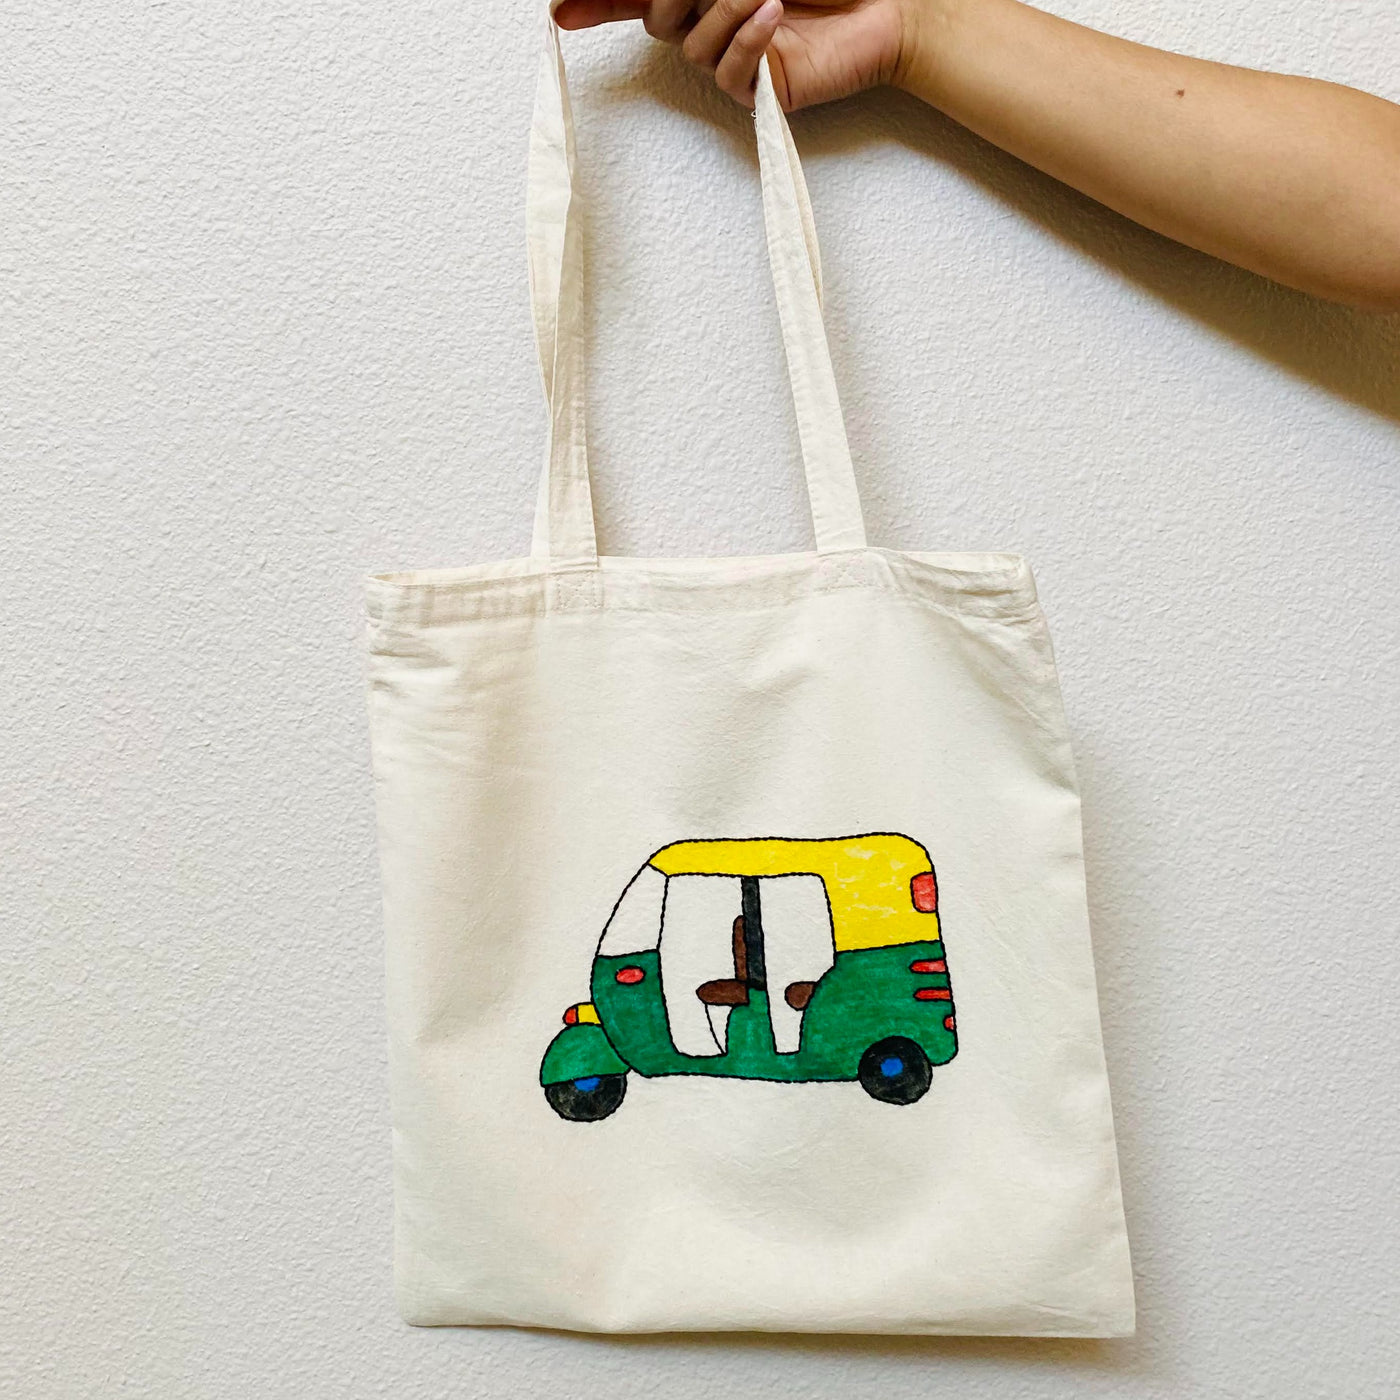 Custom Embroidered Tote by NehaXStitch